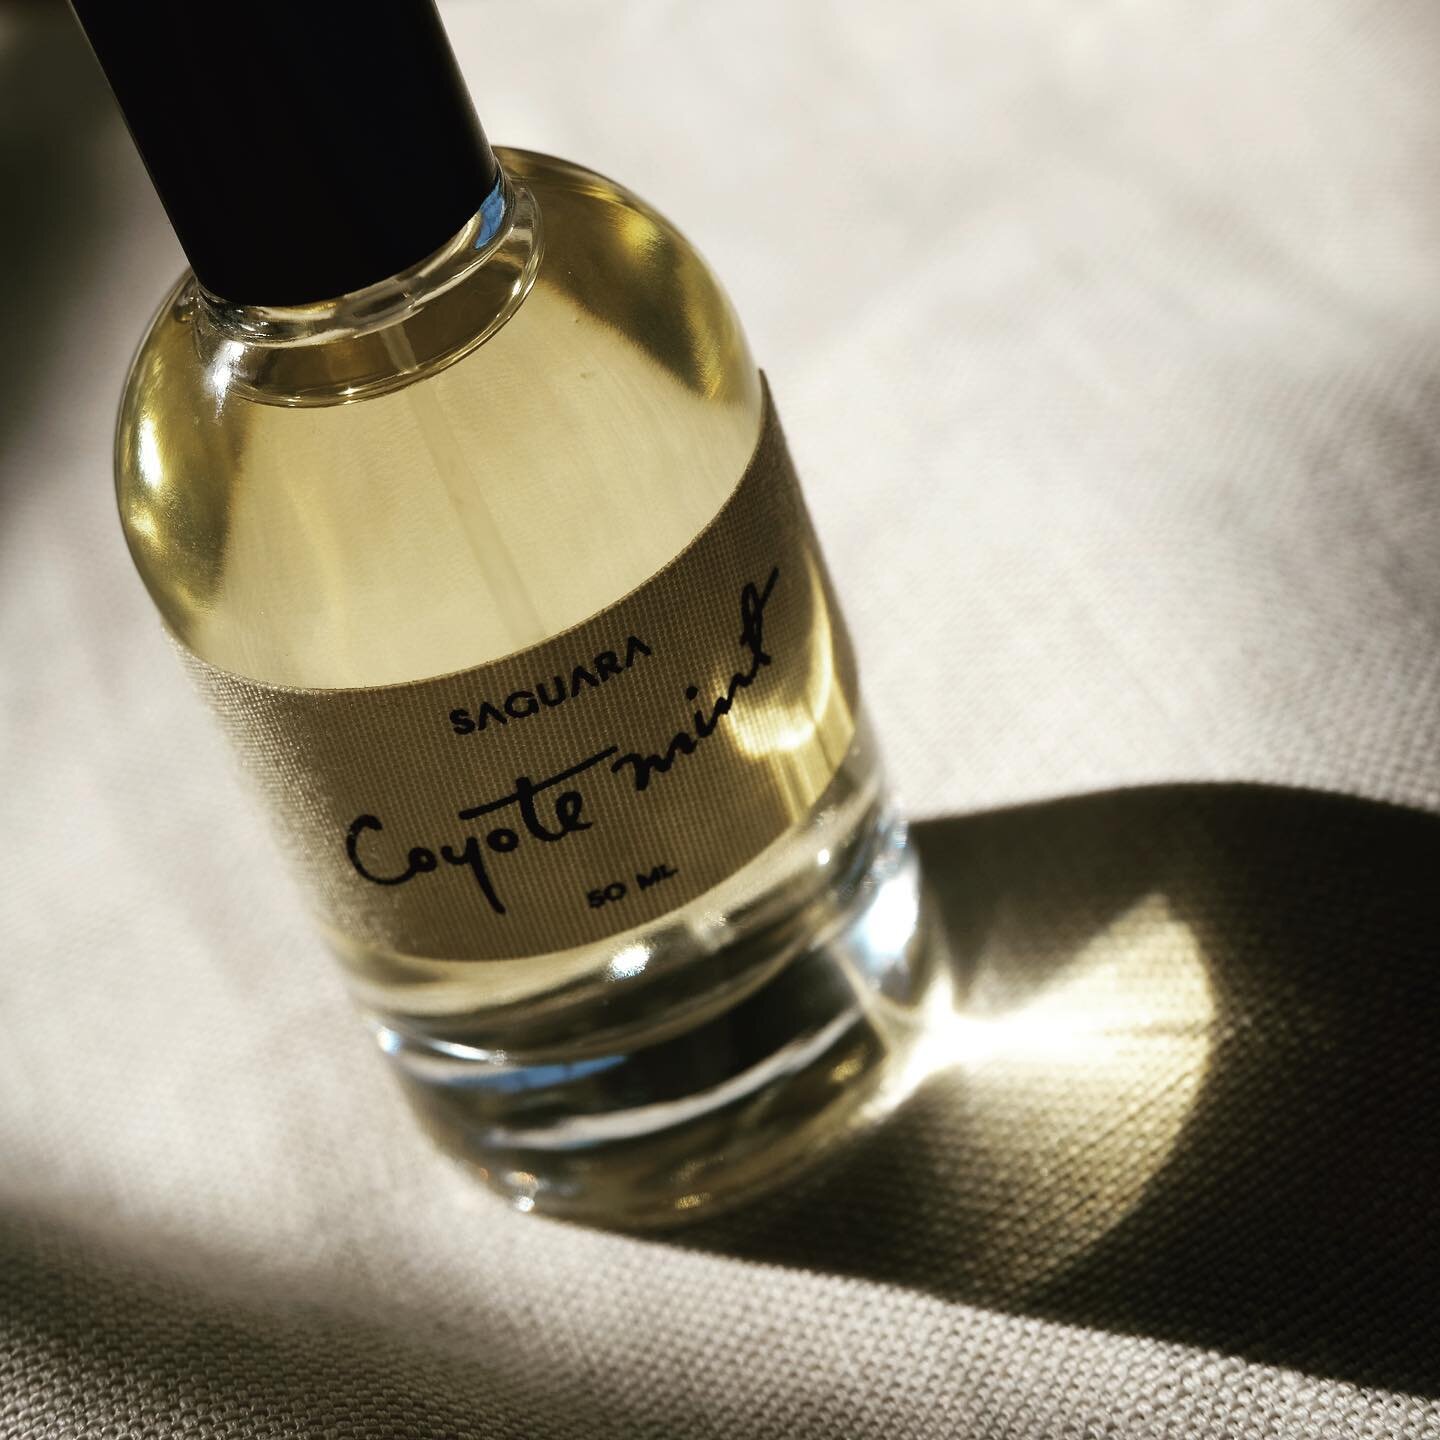 Calming the heat with notes of palo santo and mint @orrisperfumery